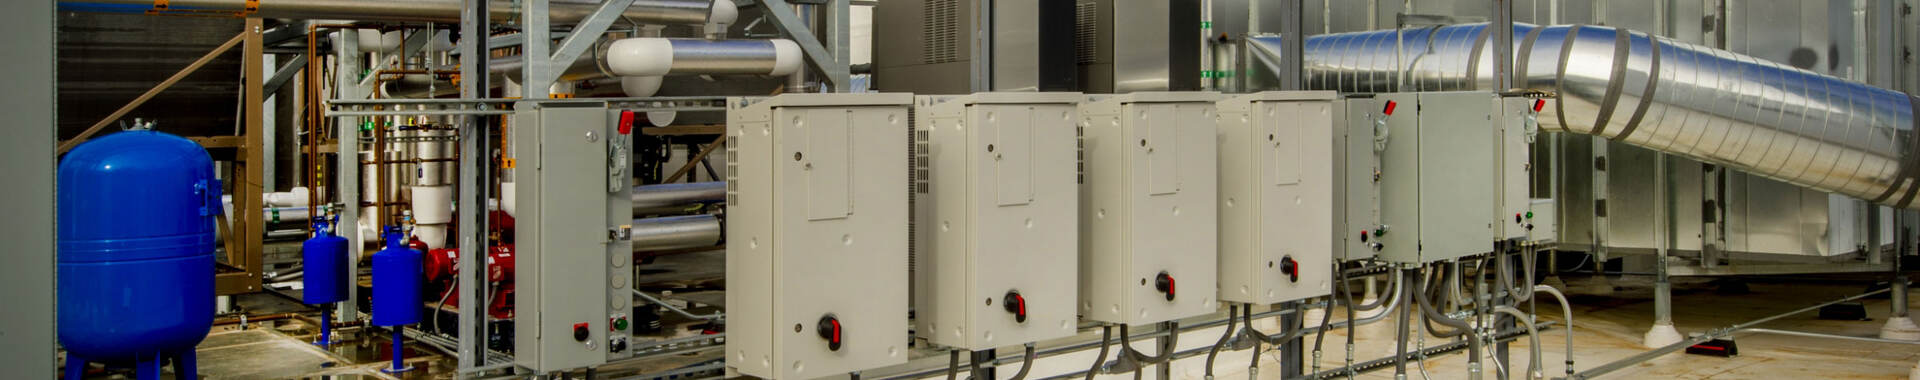 Industrial control panels on roof with covers